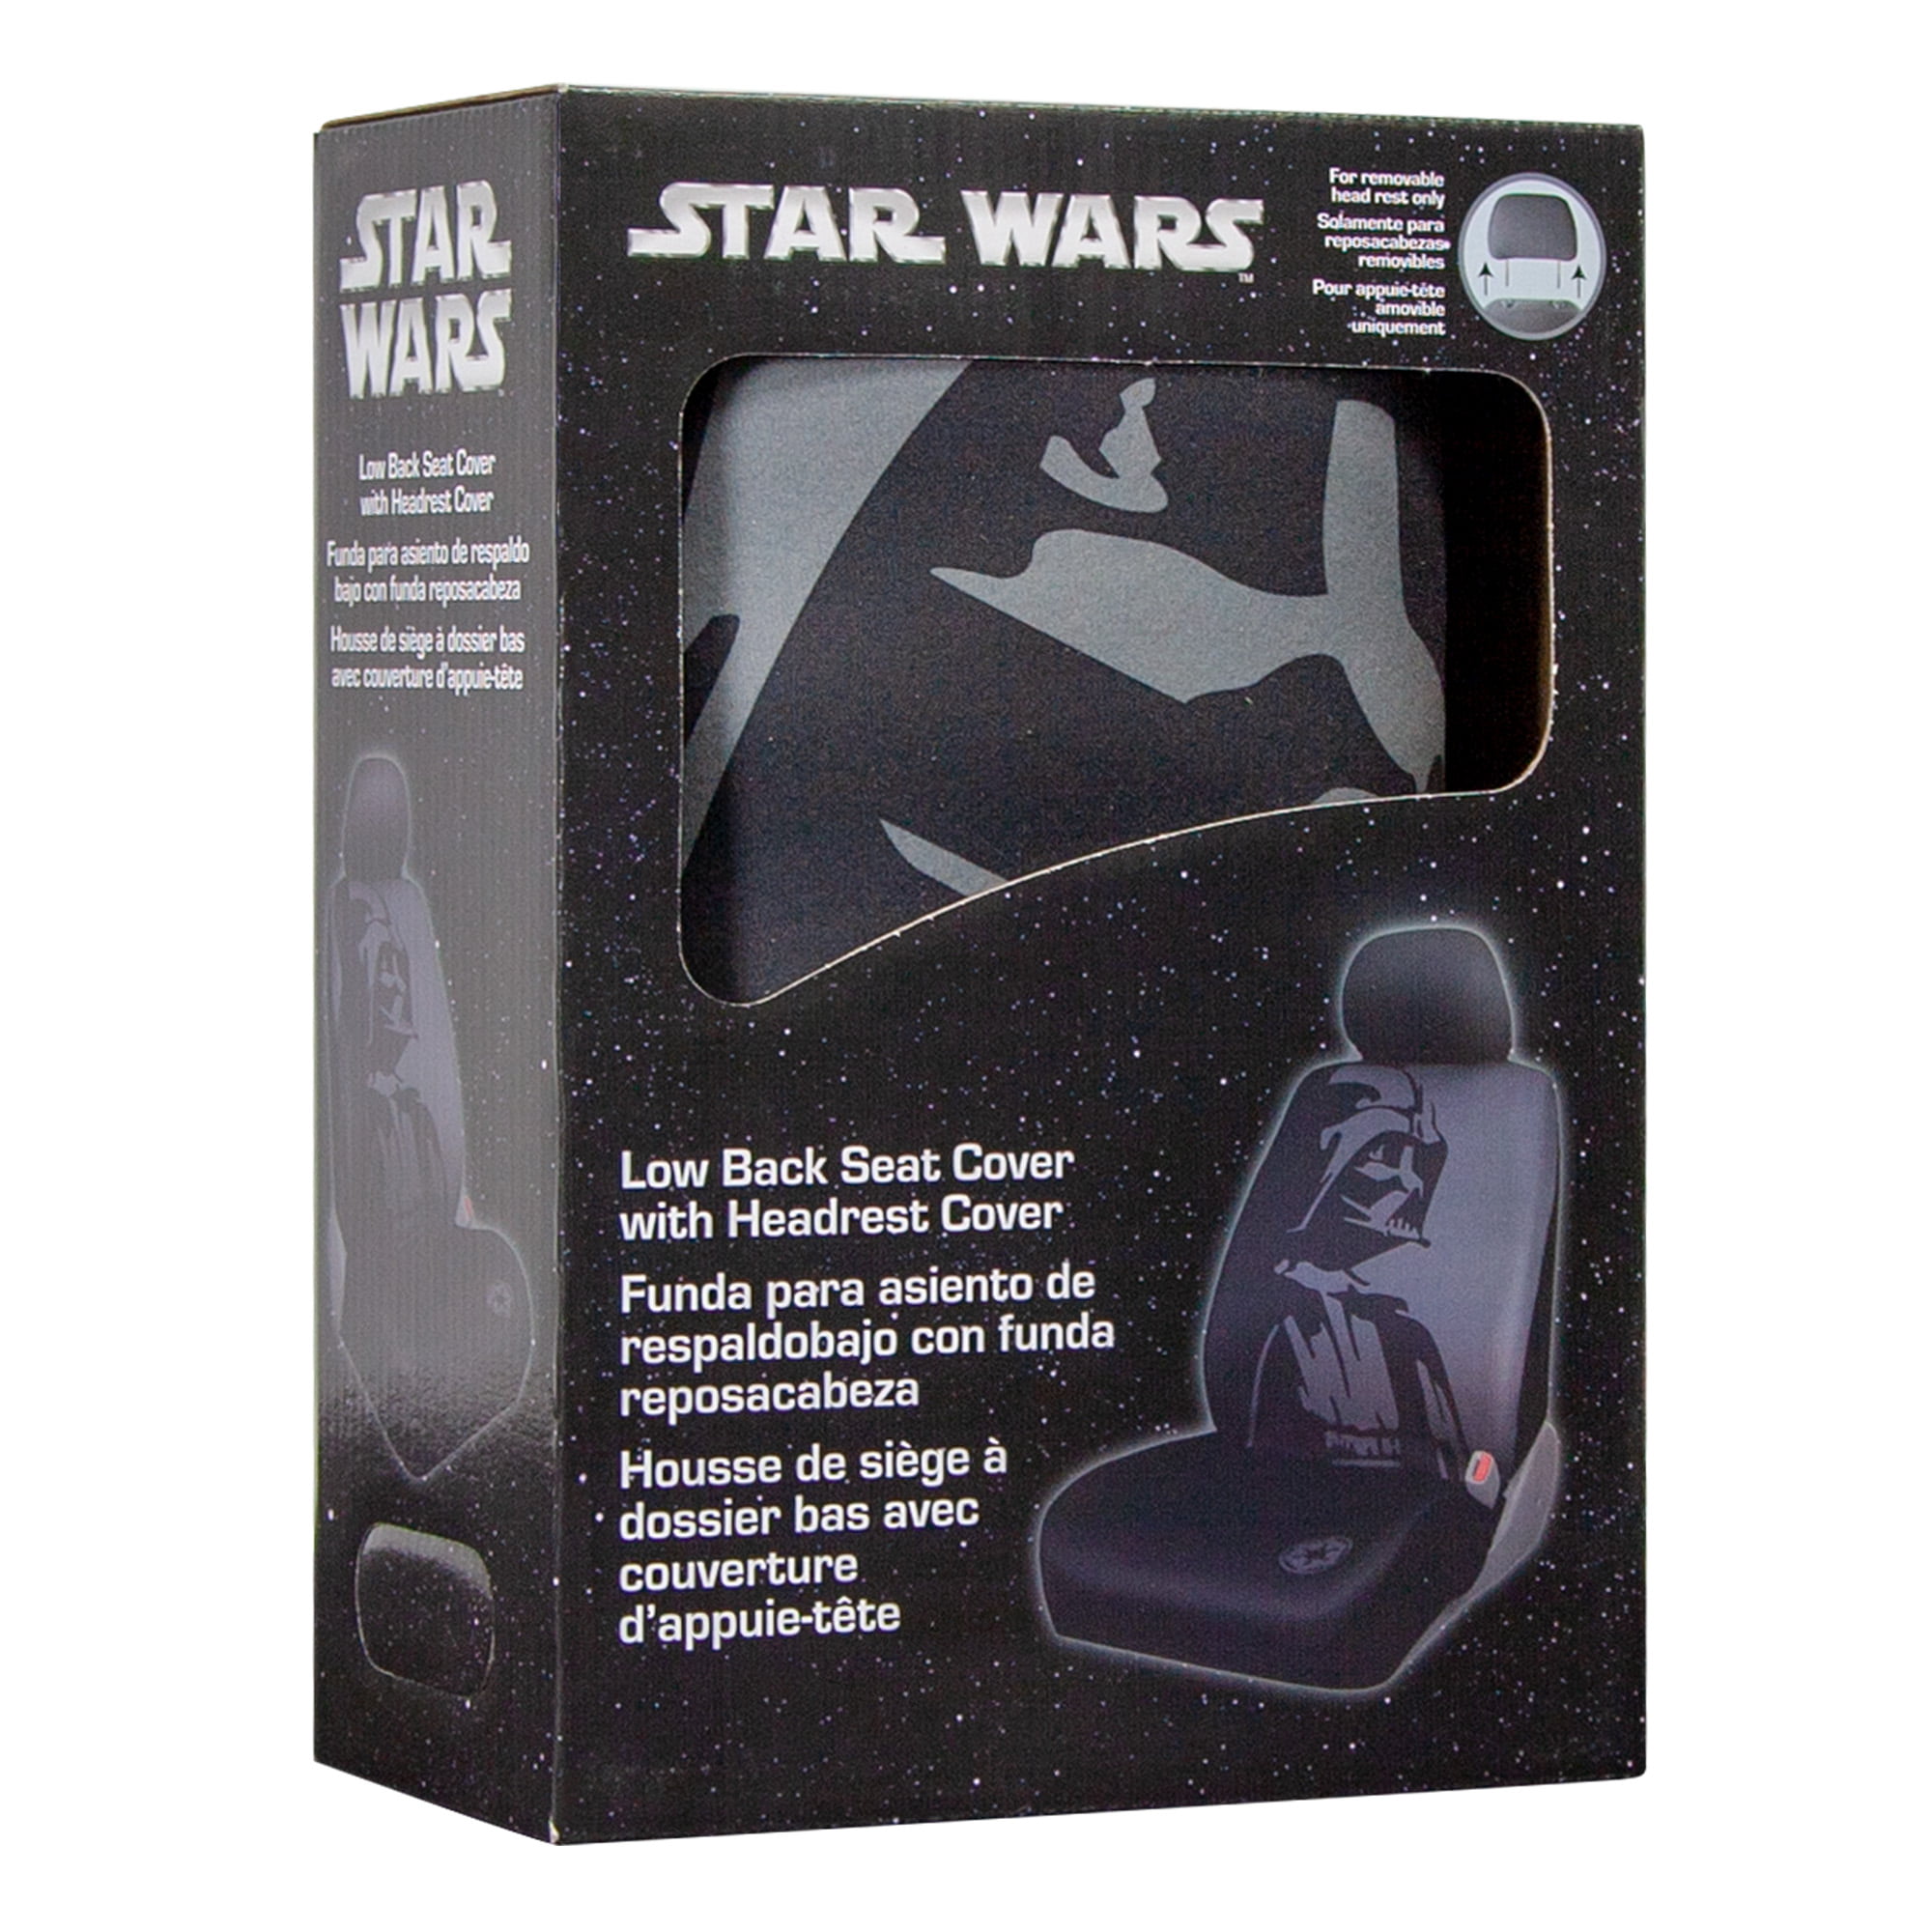 Star Wars Low Back Seat Cover with Head Rest Cover